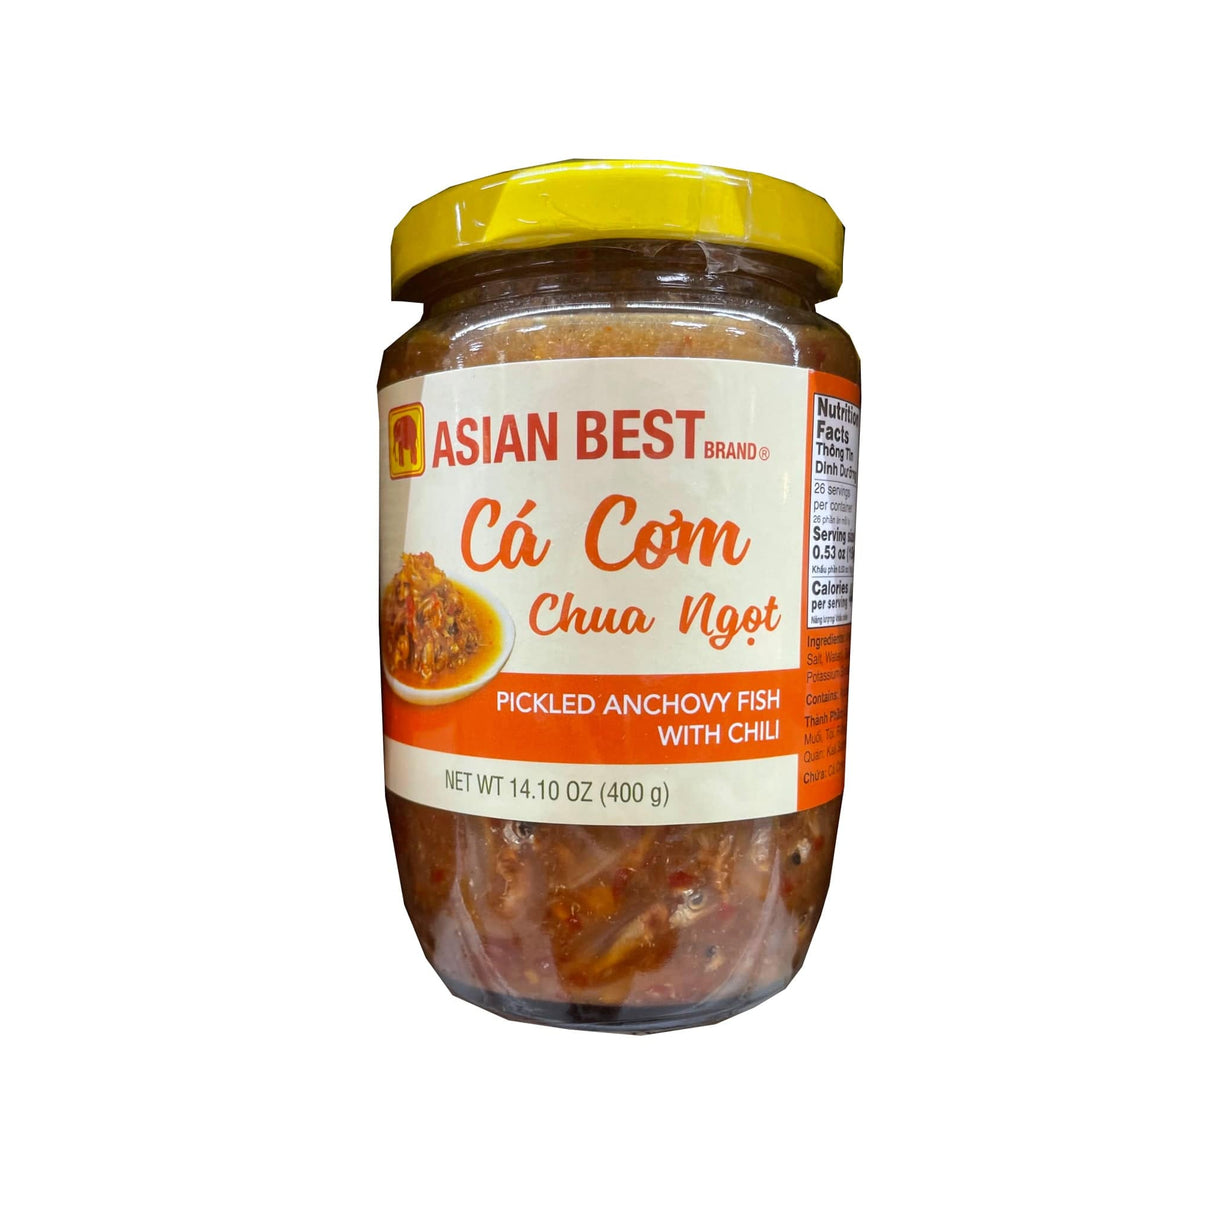 Asian Best Brand Pickled Anchovy Fish with Chili (Ca Com Chua Ngot)